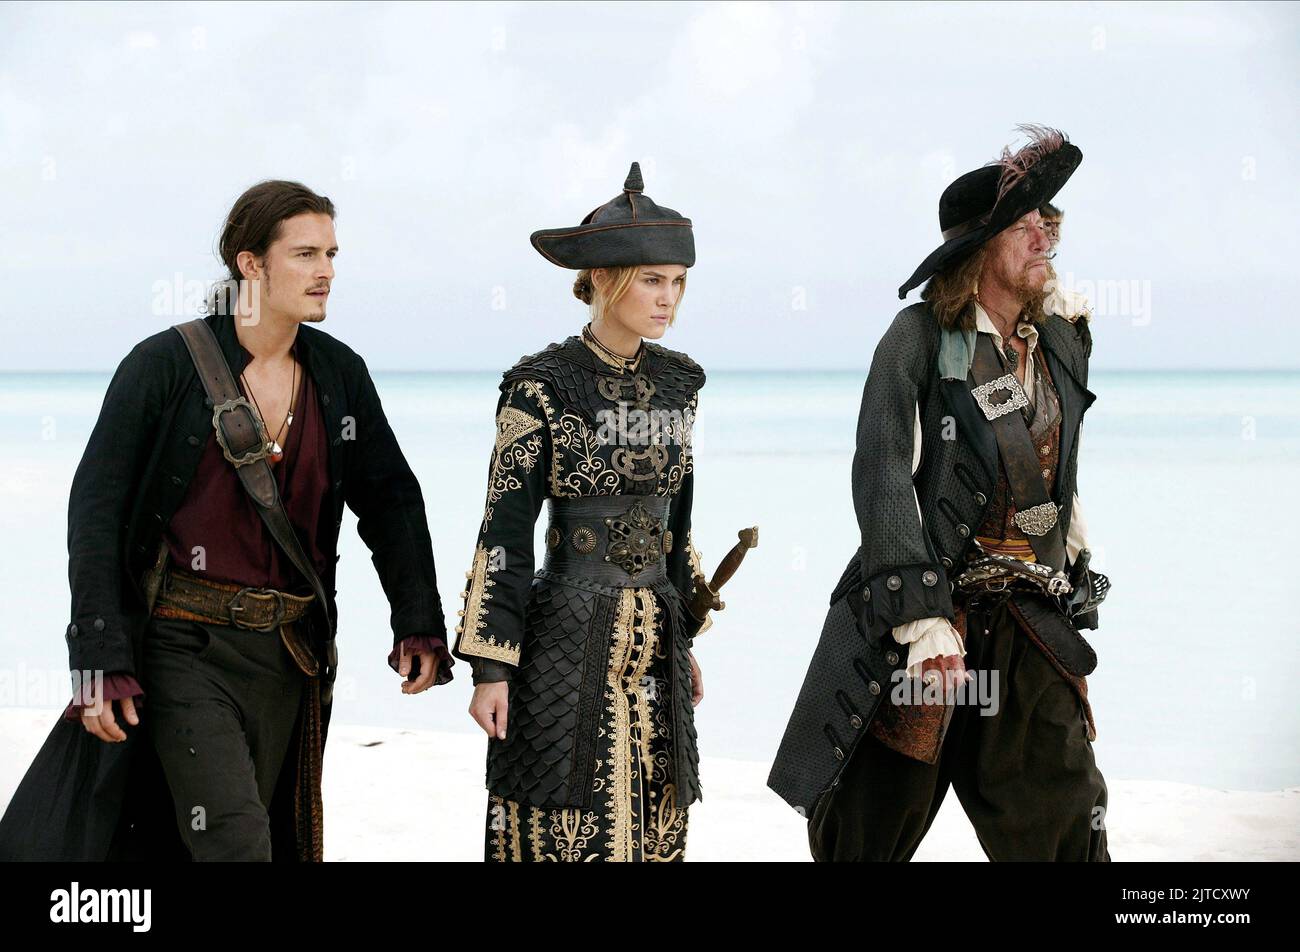 ORLANDO BLOOM, KEIRA KNIGHTLEY, GEOFFREY RUSH, PIRATES OF THE CARIBBEAN: AT WORLD'S END, 2007 Stock Photo